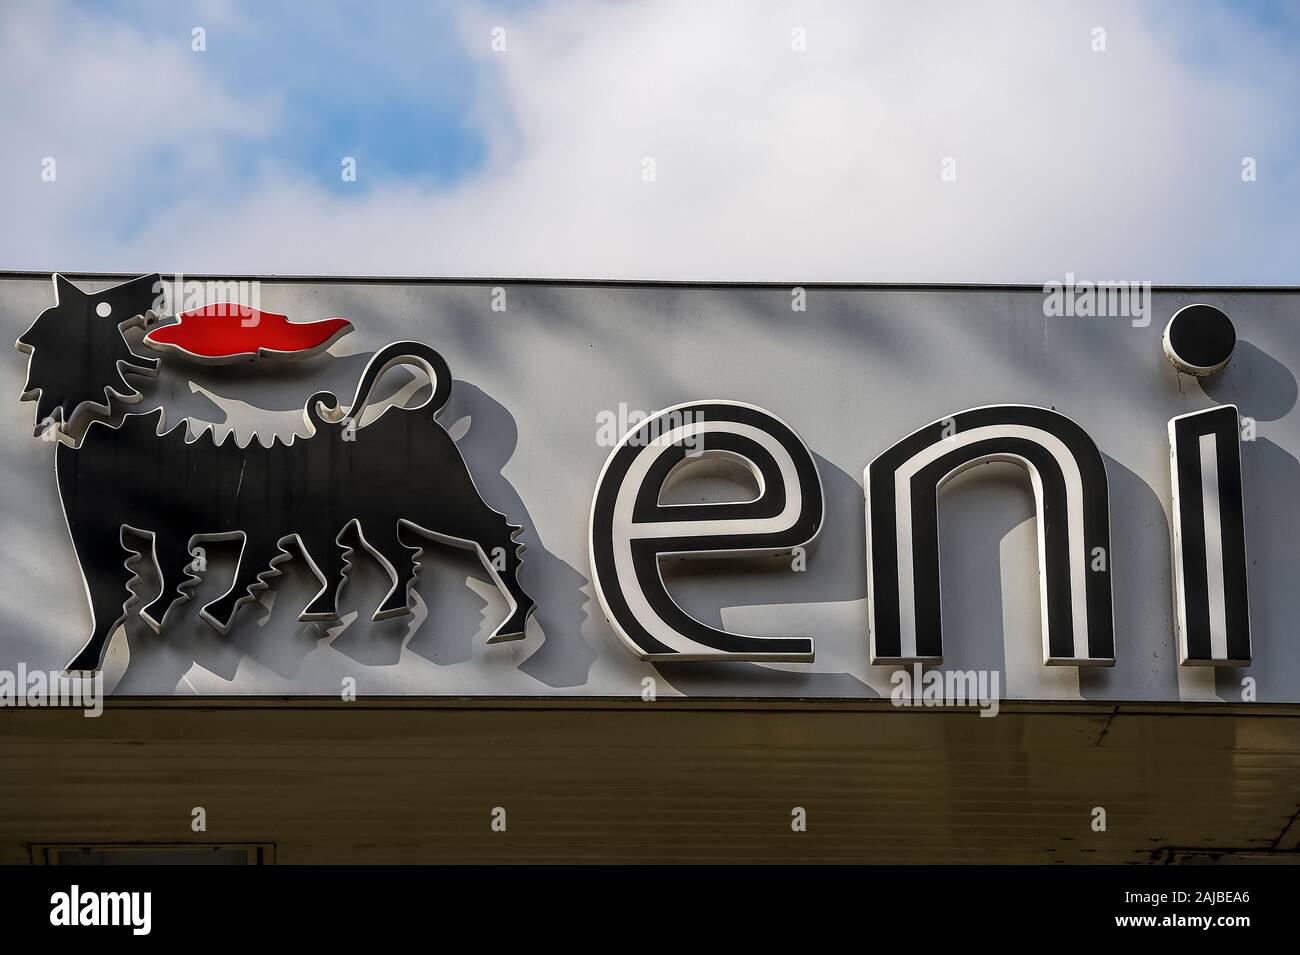 Turin, Italy - 06 November, 2019: The sign for Eni (Ente Nazionale Idrocarburi) is seen at a Eni gasoline station. Italian trade unions called a two-day petrol station strike. The action is due to new measures being brought in by the government, including the introduction of electronic invoicing.(6th and 7th Novembre 2019) petrol station strike. The action is due to new measures being brought in by the government, including the introduction of electronic invoicing. Credit: Nicolò Campo/Alamy Live News Stock Photo